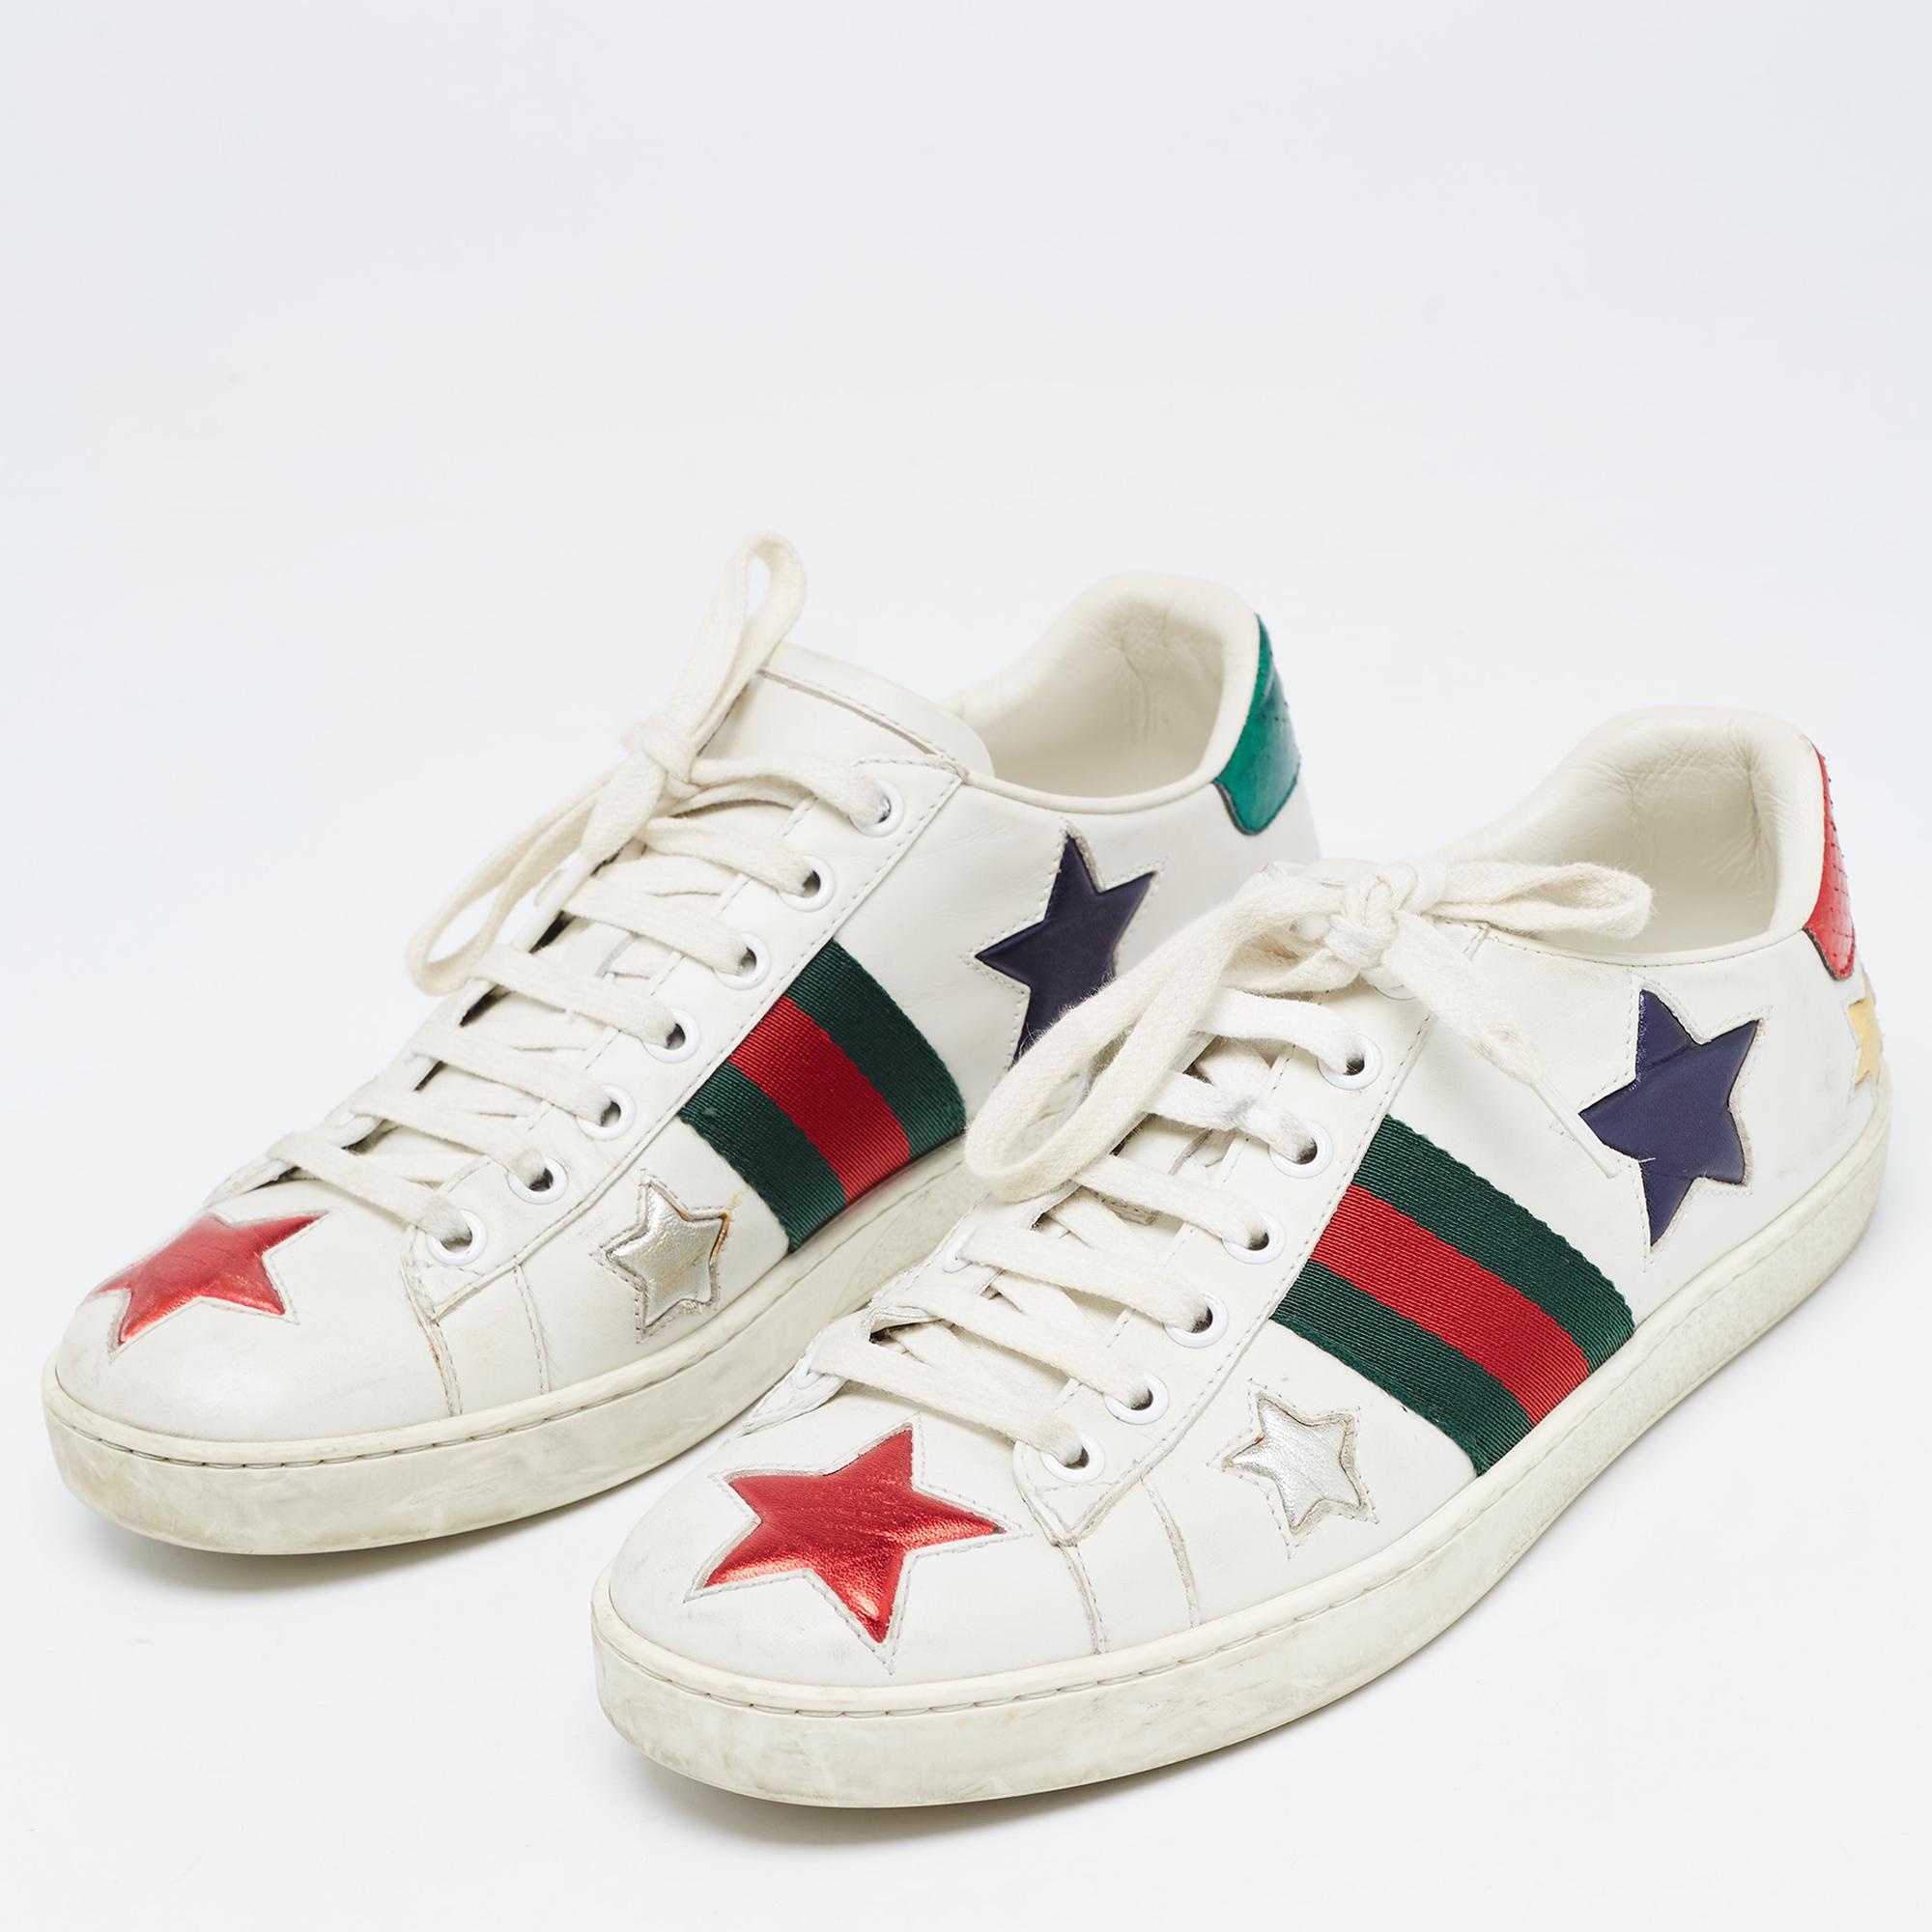 Gucci White Leather Ace Stars Low Top Sneakers Size 37.5 In Good Condition For Sale In Dubai, Al Qouz 2